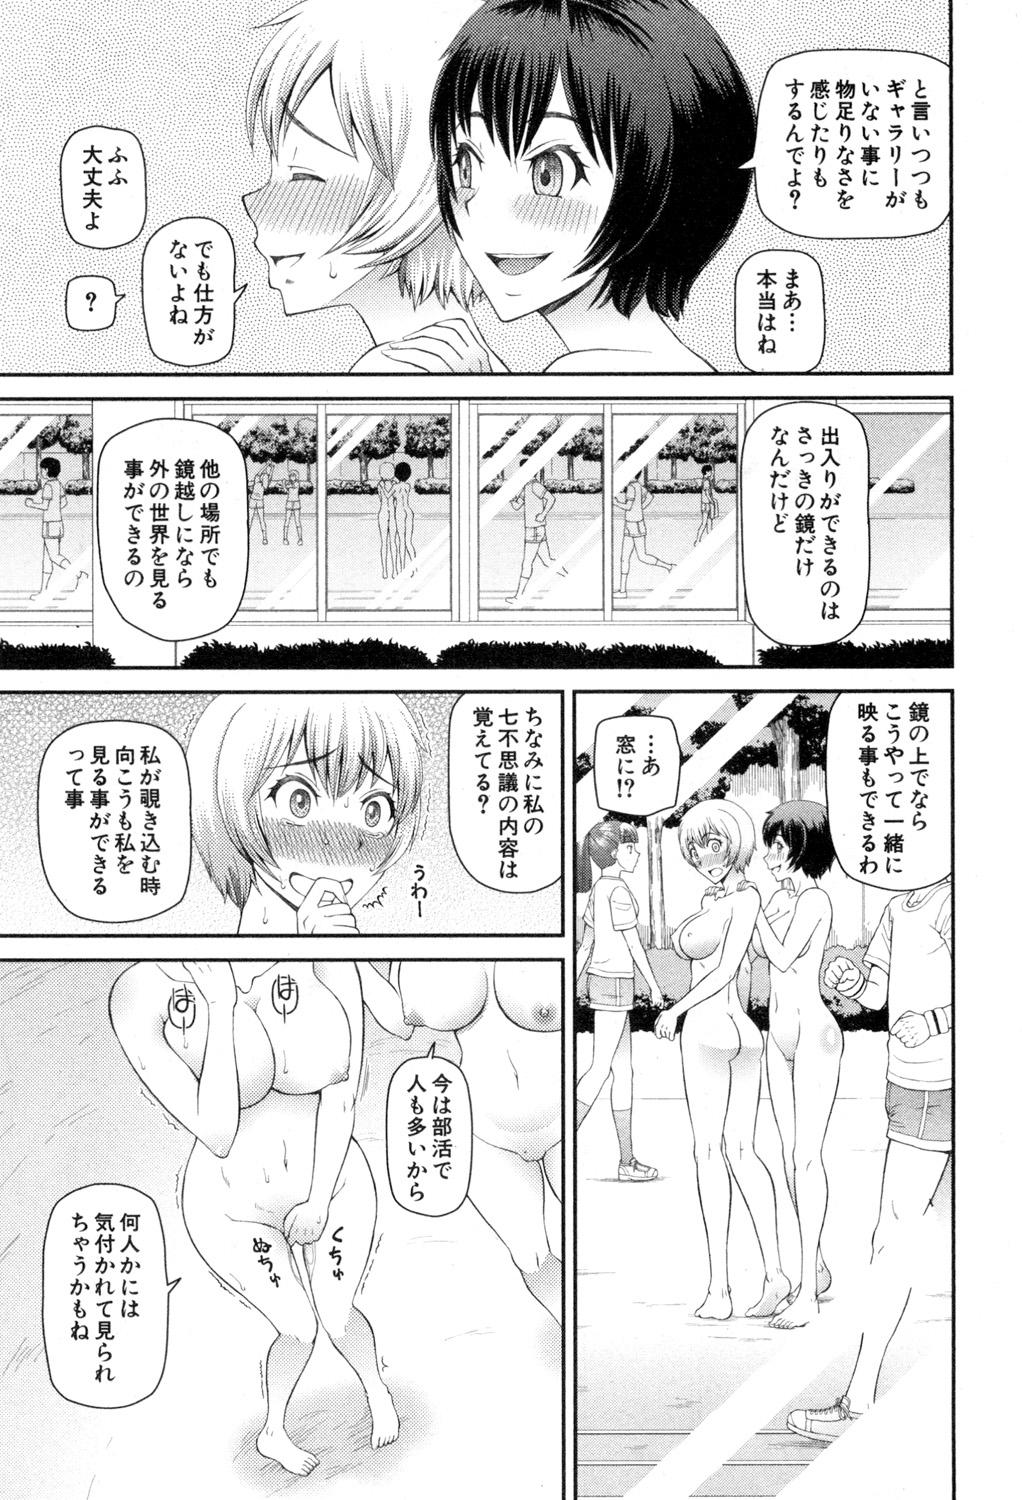 BUSTER COMIC 2015-07 175